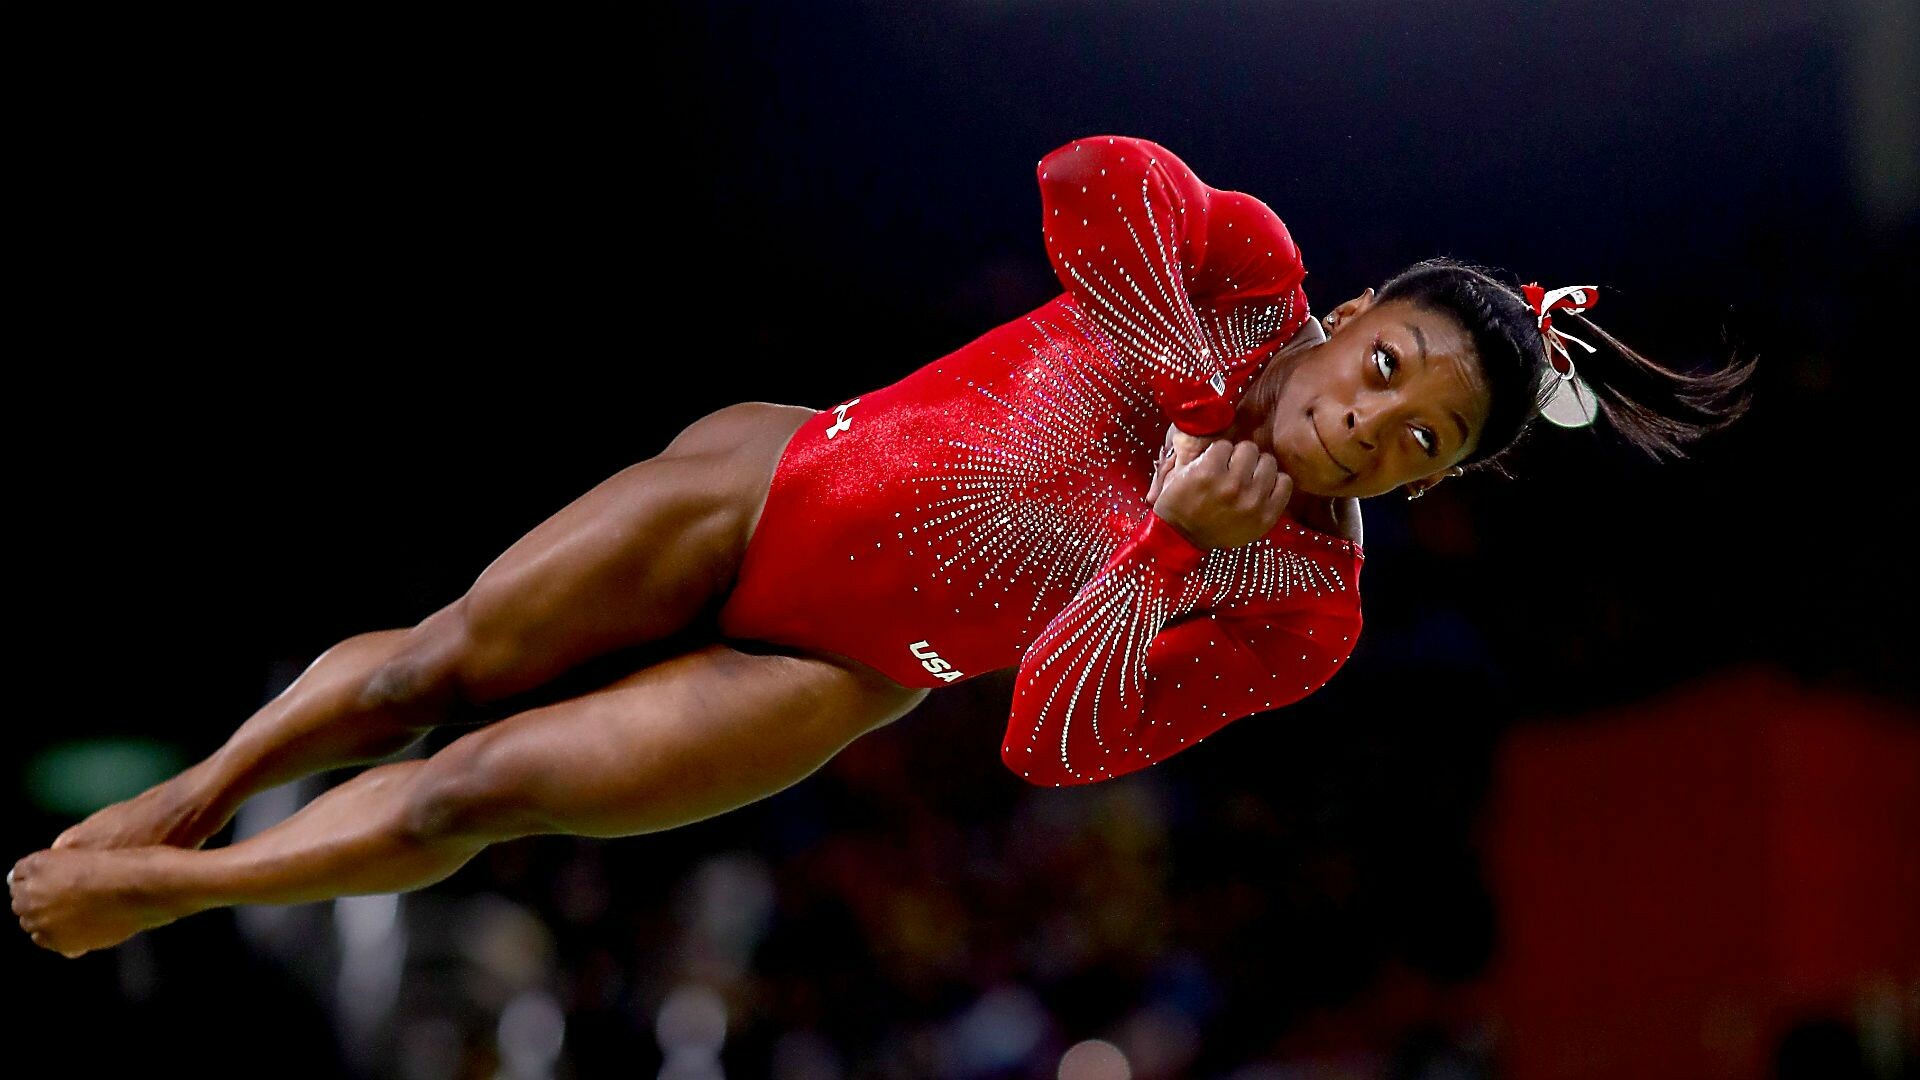 Simone Biles: She won gold in the floor exercise final at Rio 2016 Summer Olympics. 1920x1080 Full HD Background.